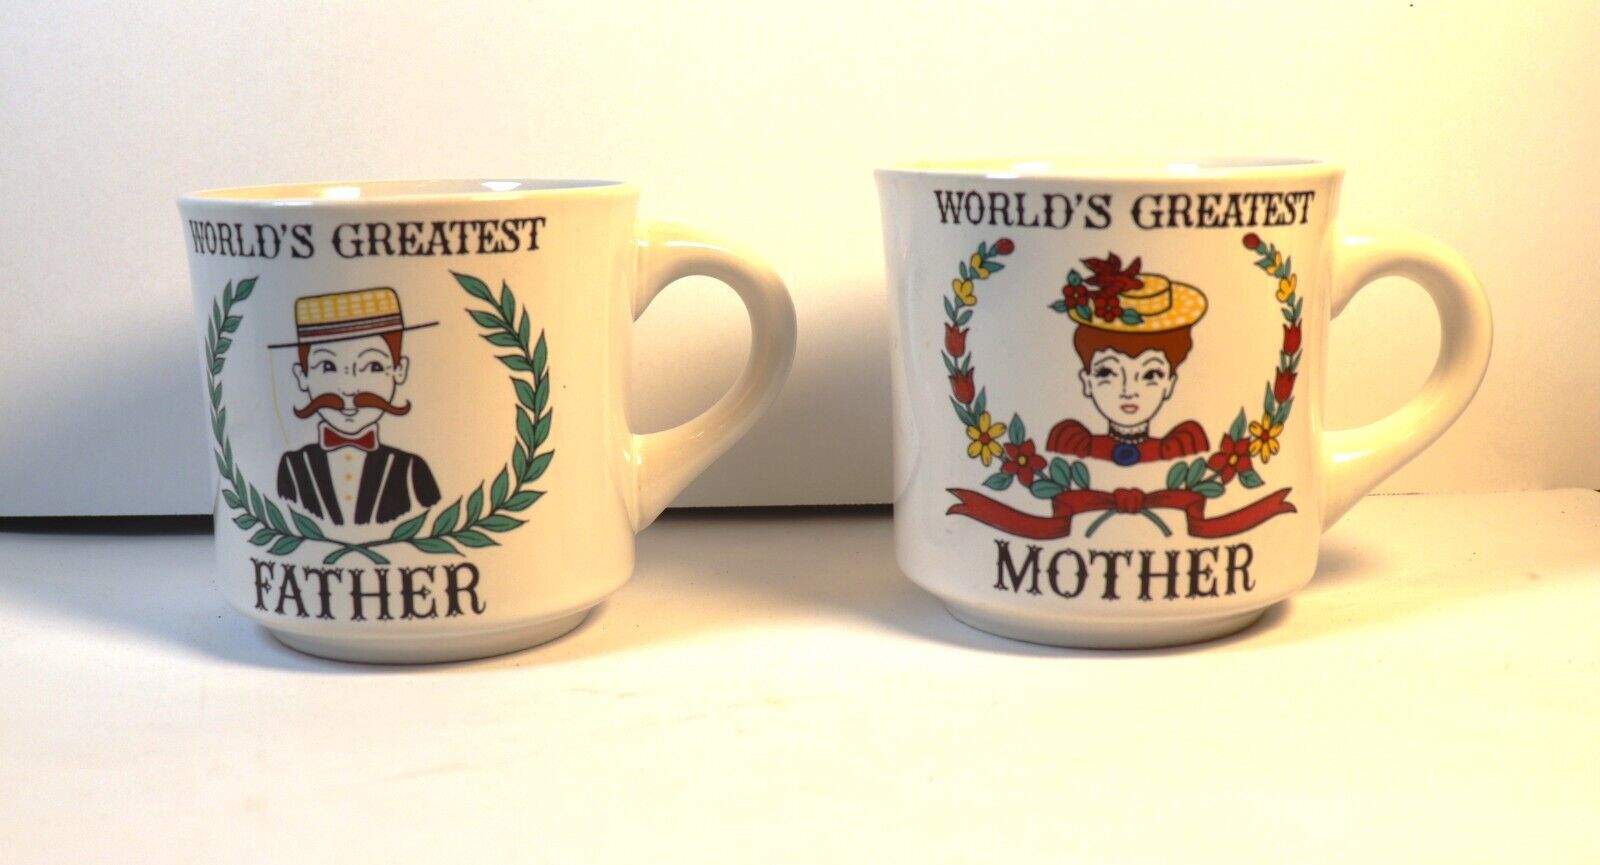 Vintage 1980s World's Greatest Father & Mother Papel Coffee Mugs Cups Pair Set